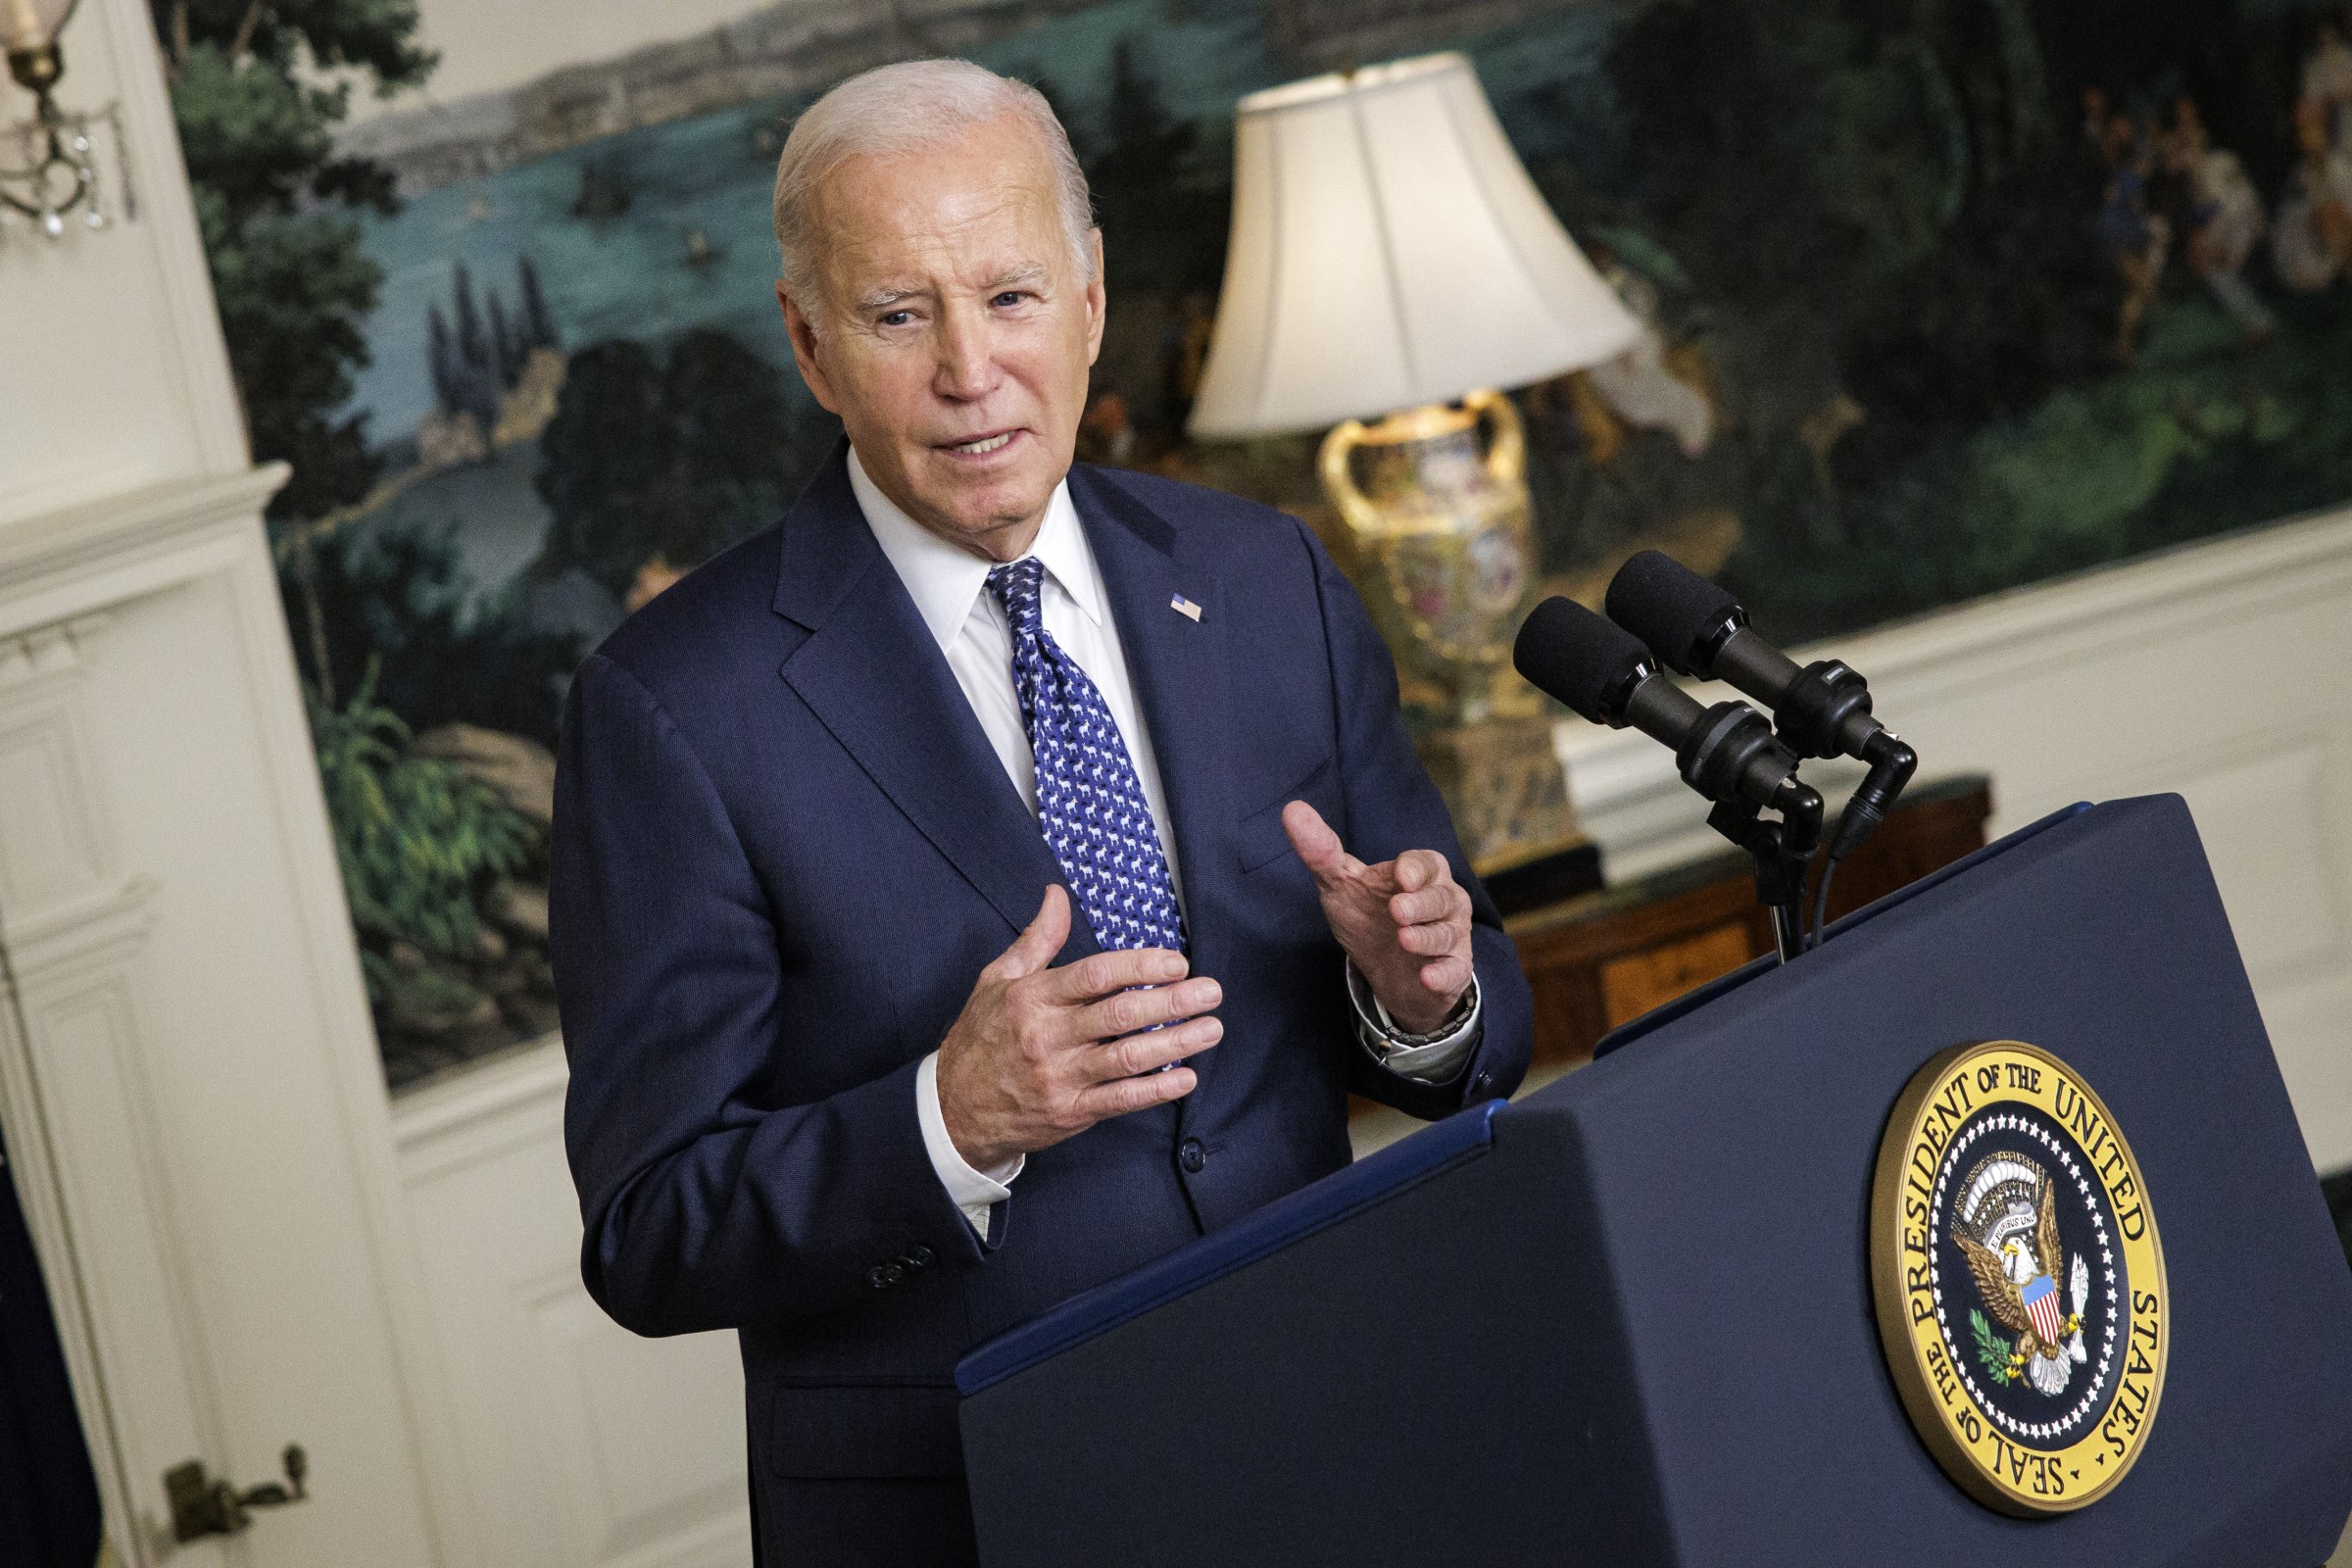 Yes, Democrats, it’s Biden or bust